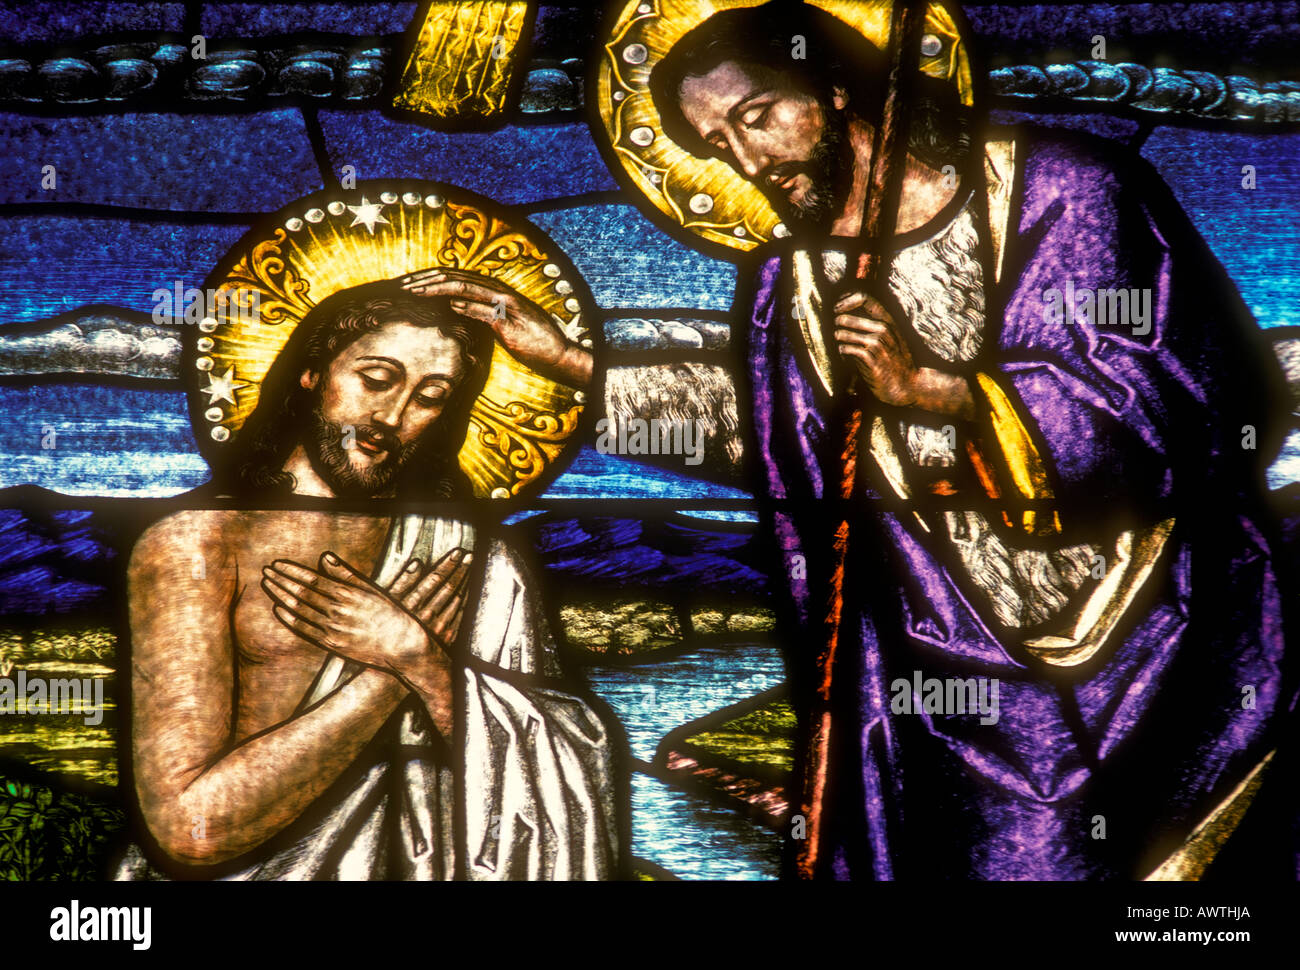 stained glass window, stained glass, The Baptism of Our Lord Jesus Christ, John the Baptist, Jesus Christ, Baptism of Jesus, Stock Photo